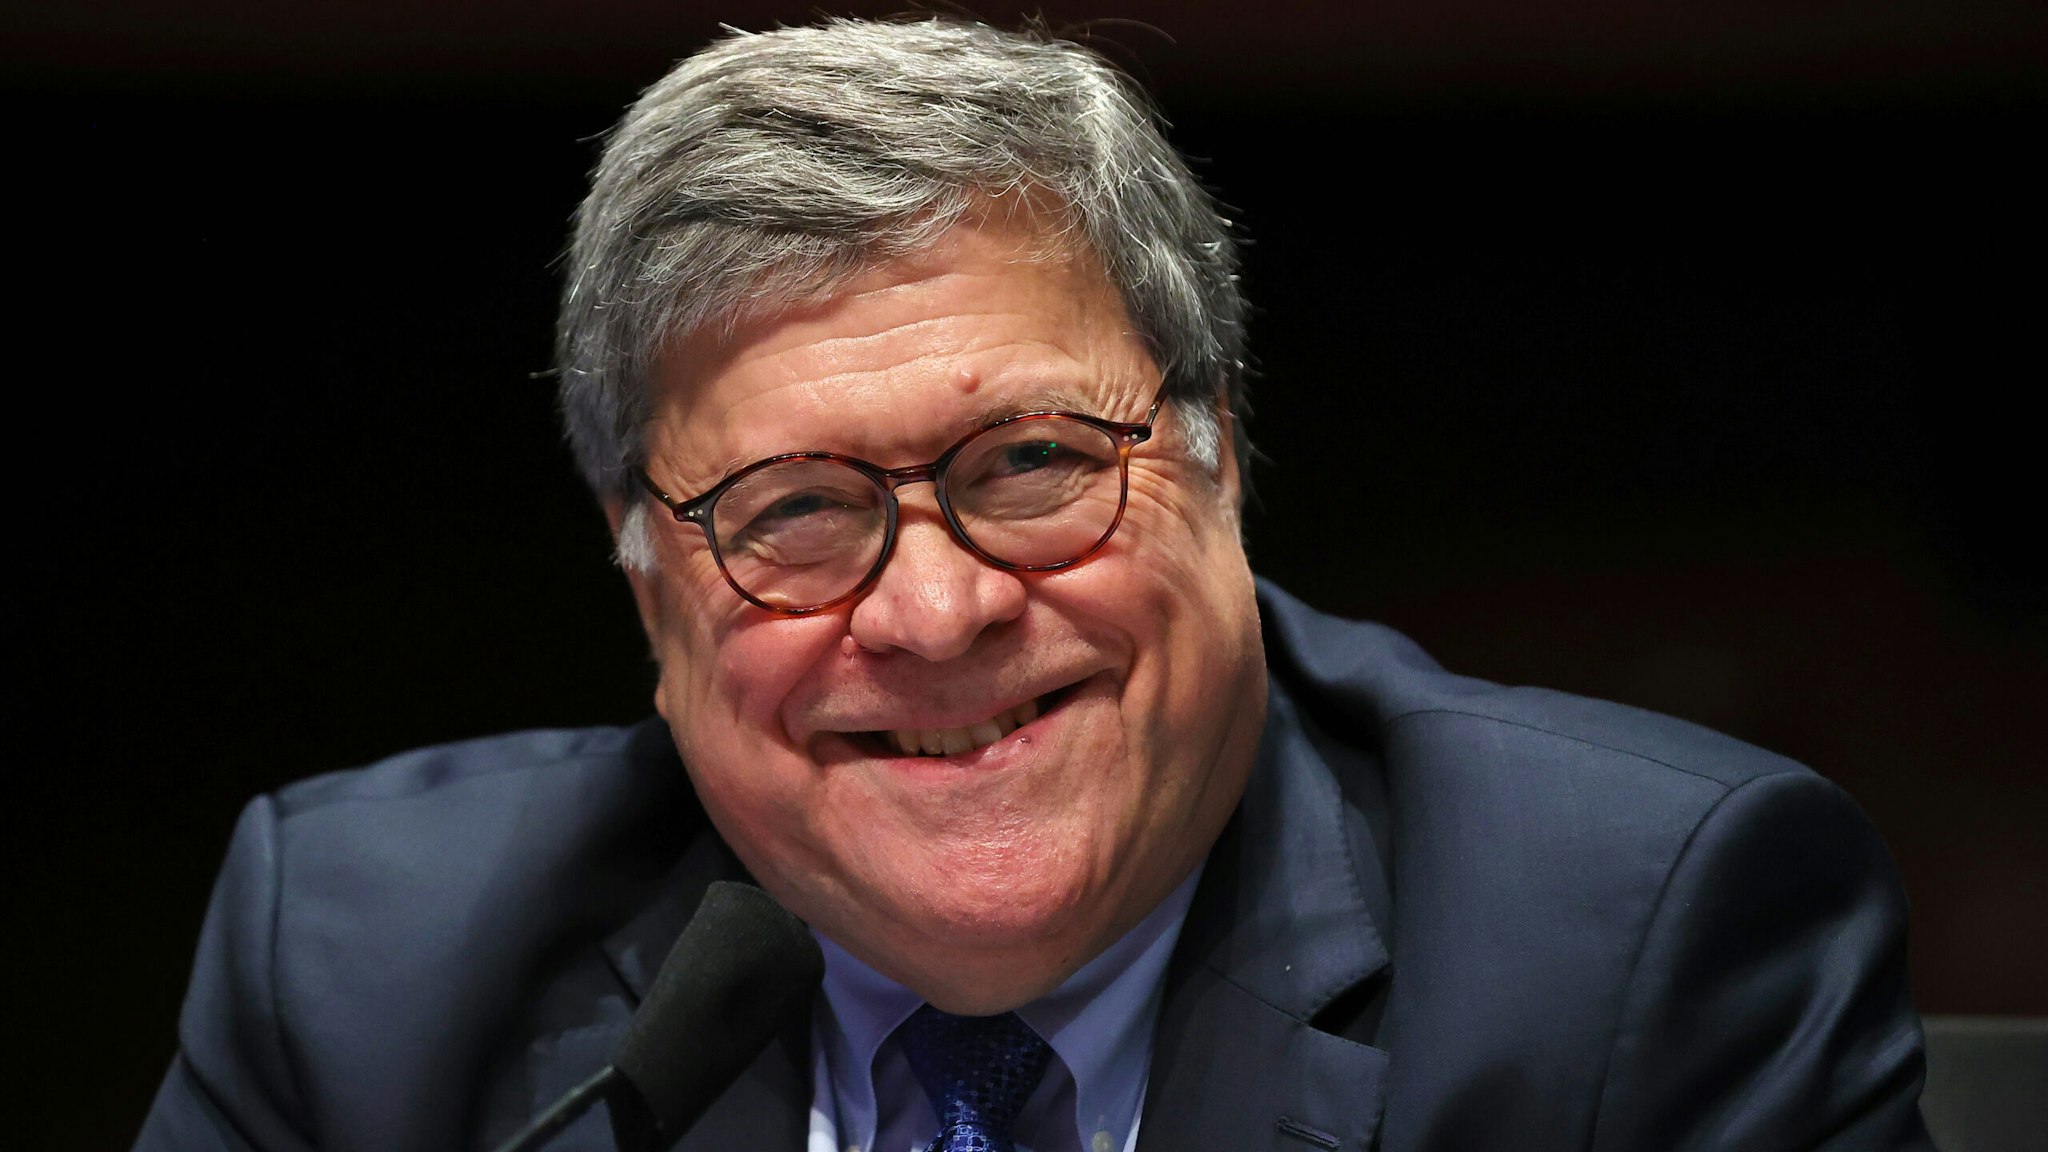 Attorney General William Barr testifies before the House Judiciary Committee hearing in the Congressional Auditorium at the US Capitol Visitors Center July 28, 2020 in Washington, DC.